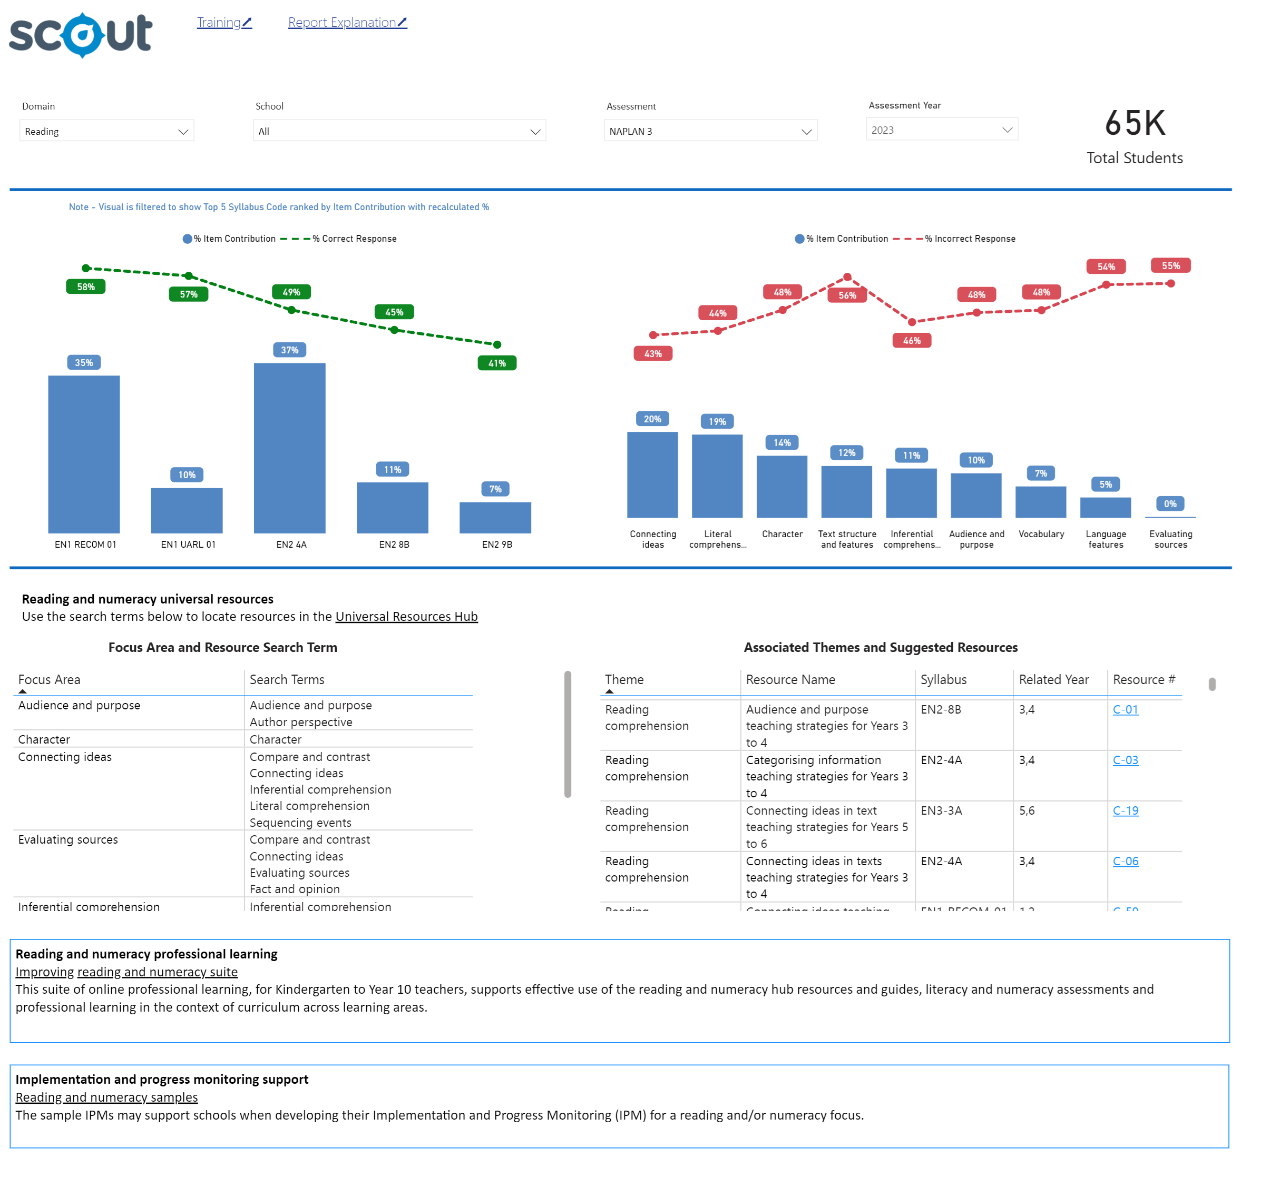 Screenshot of the Guided Data Package report